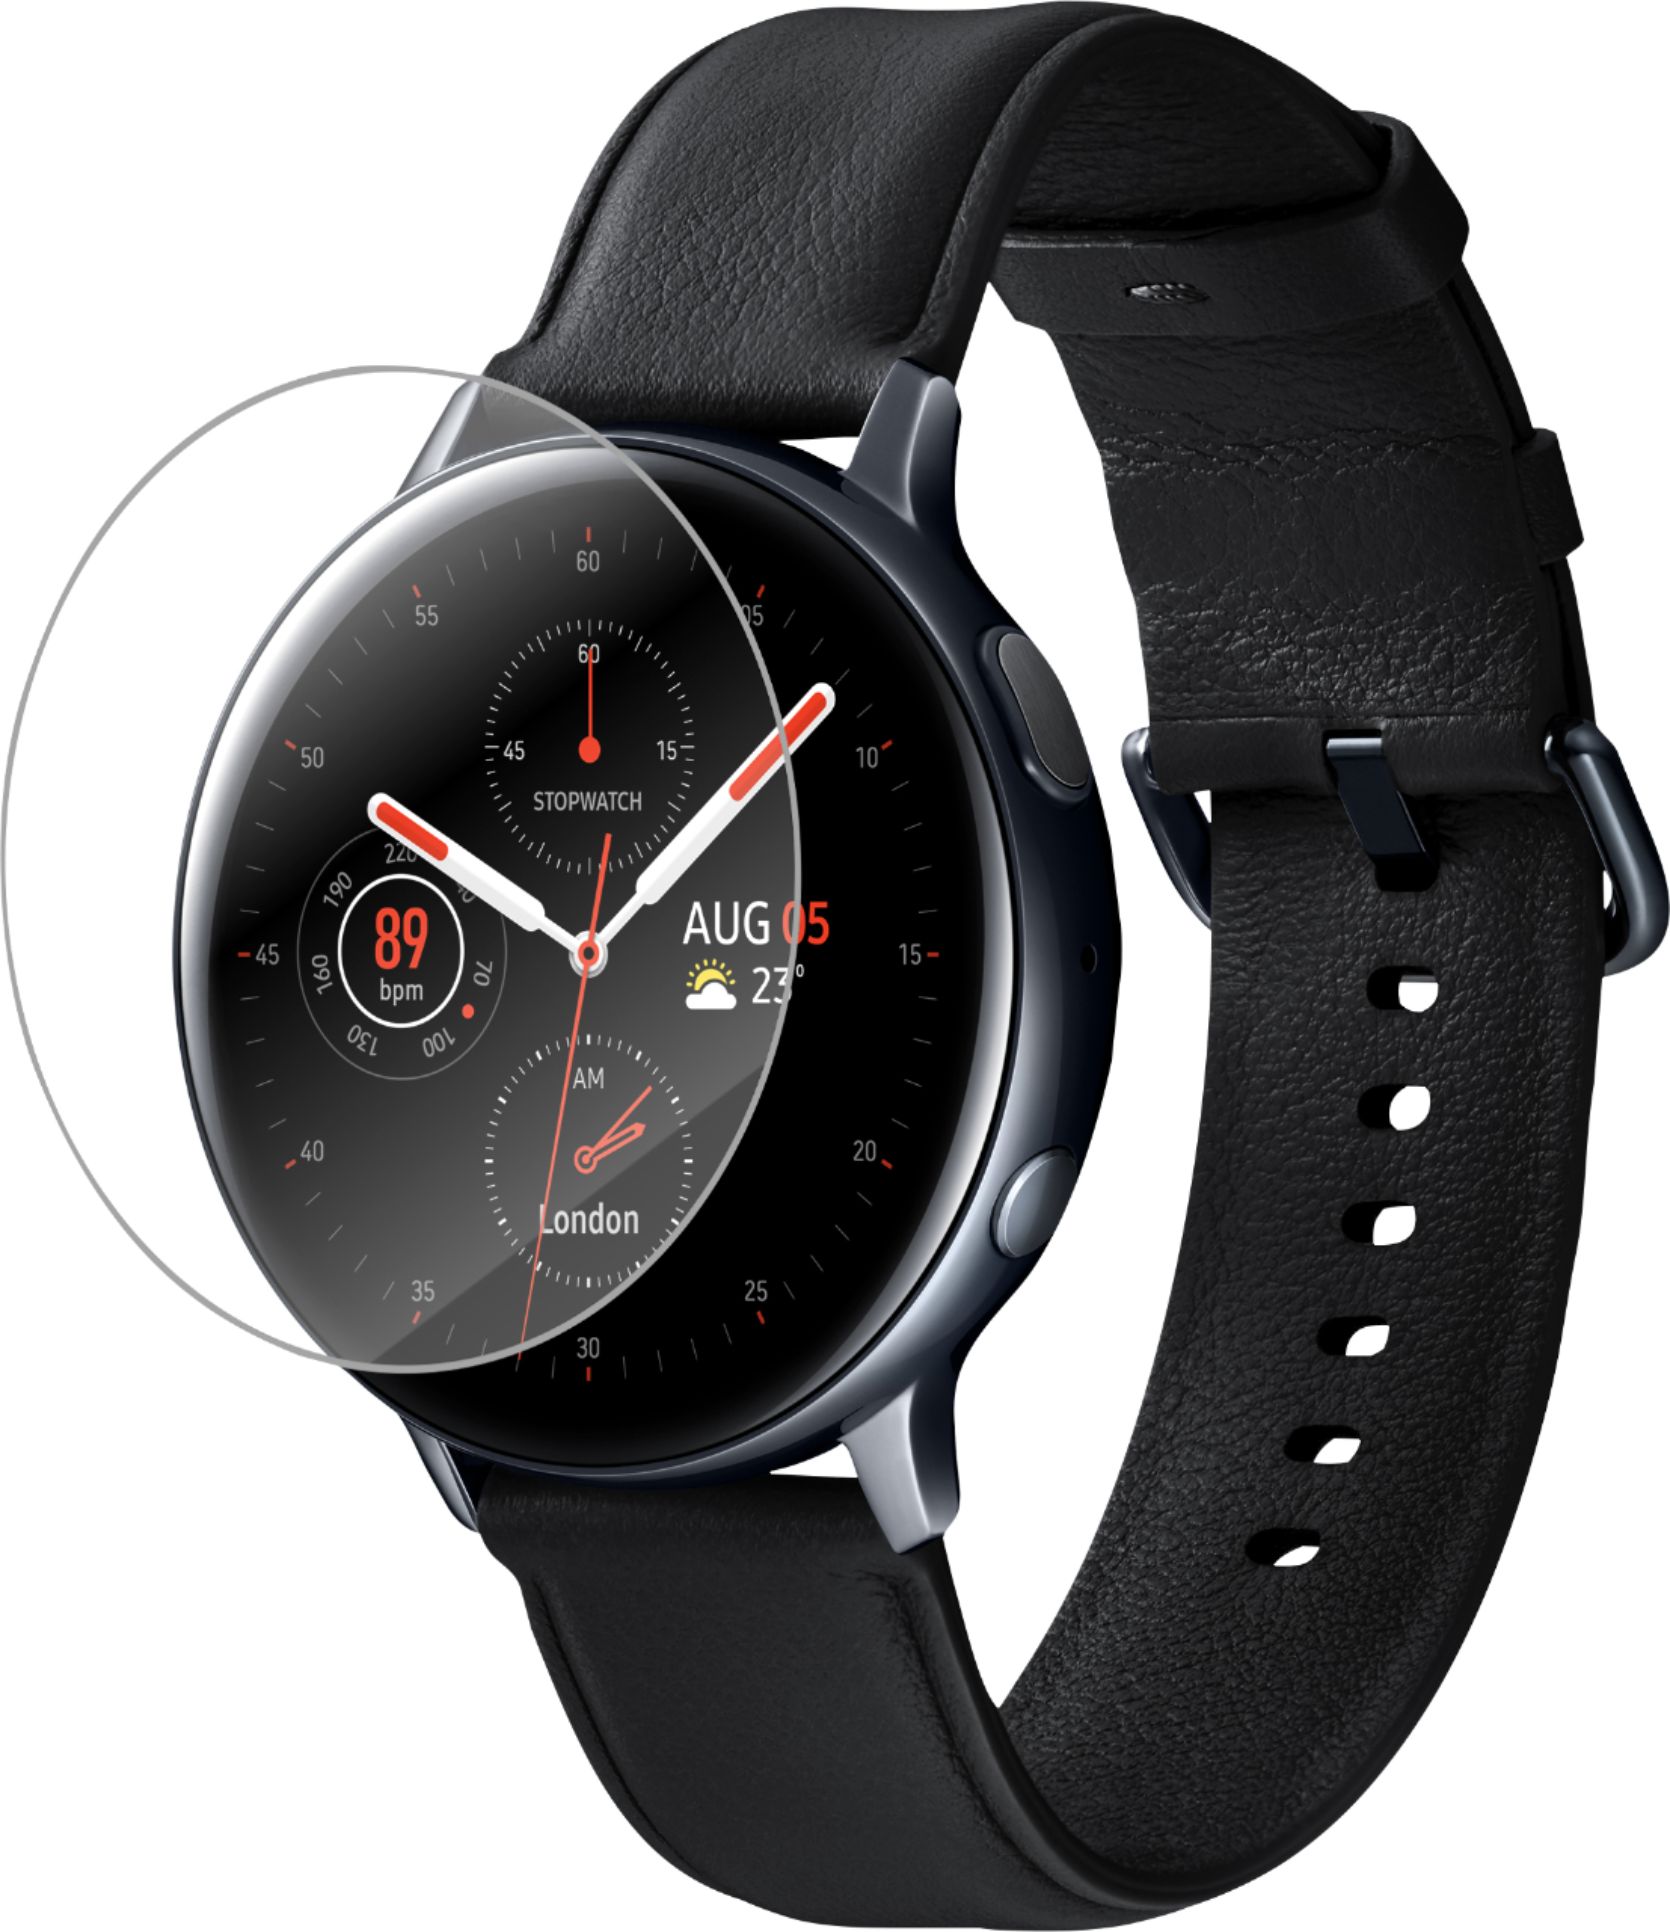 Angle View: ZAGG - InvisibleShield Ultra Clear Screen Protector for Samsung Galaxy Watch Active2 44mm - Clear